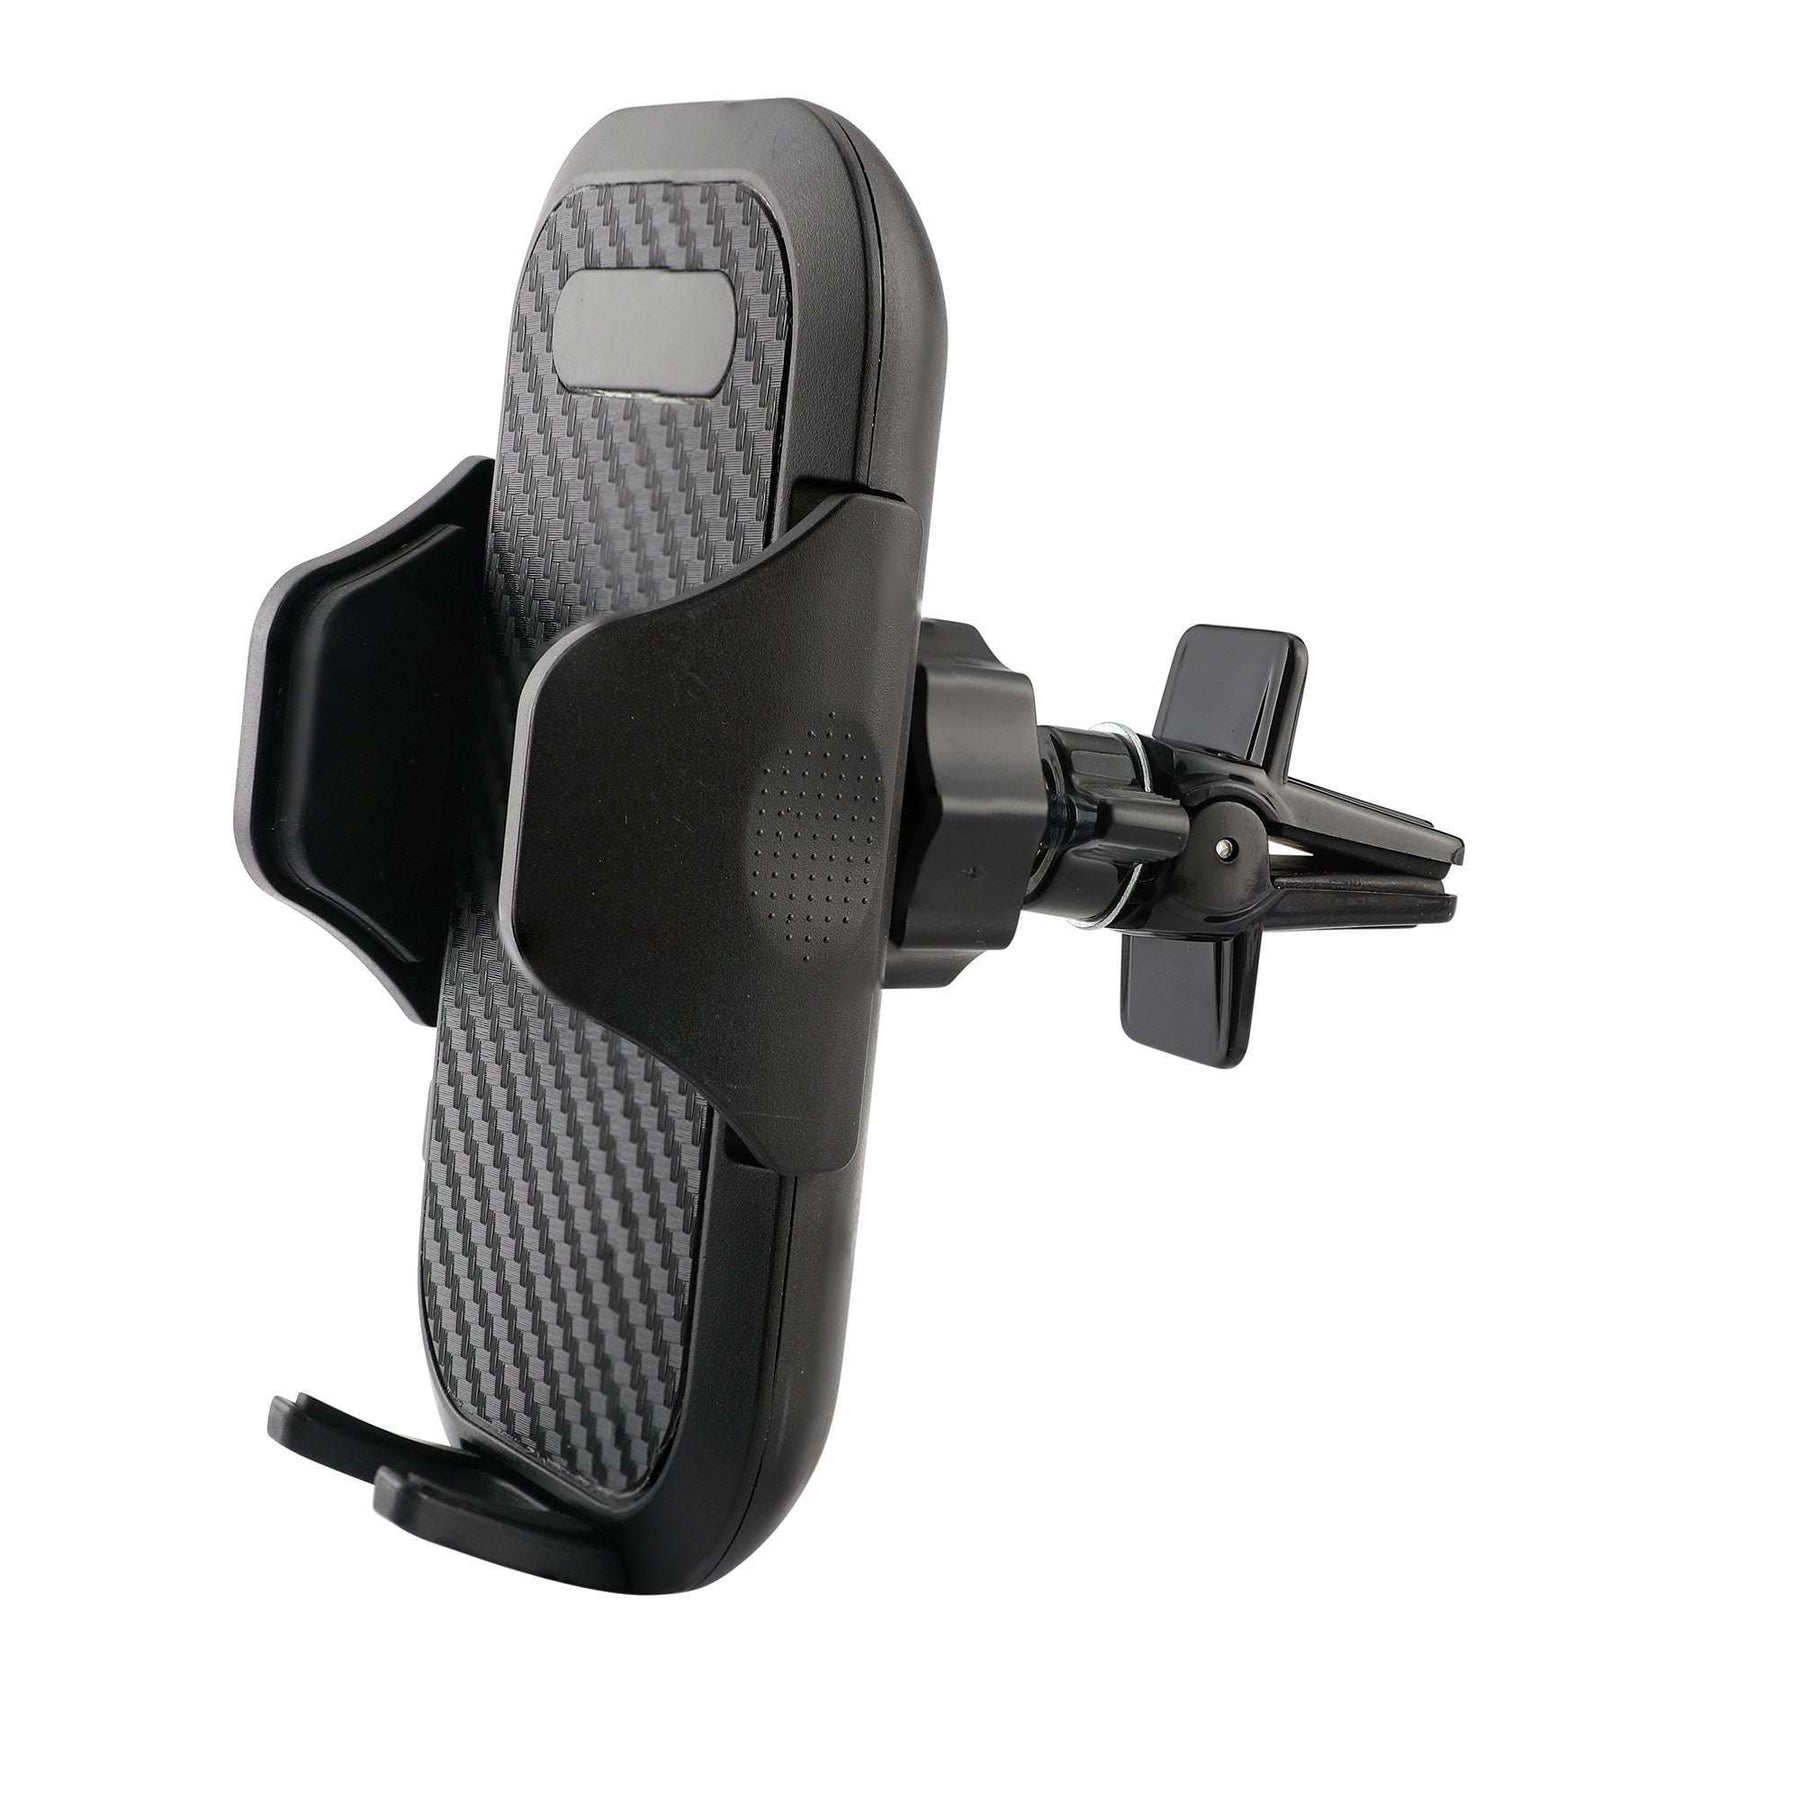 Universal Car Cell Phone Mount CD Slotted Ventilation Mount For